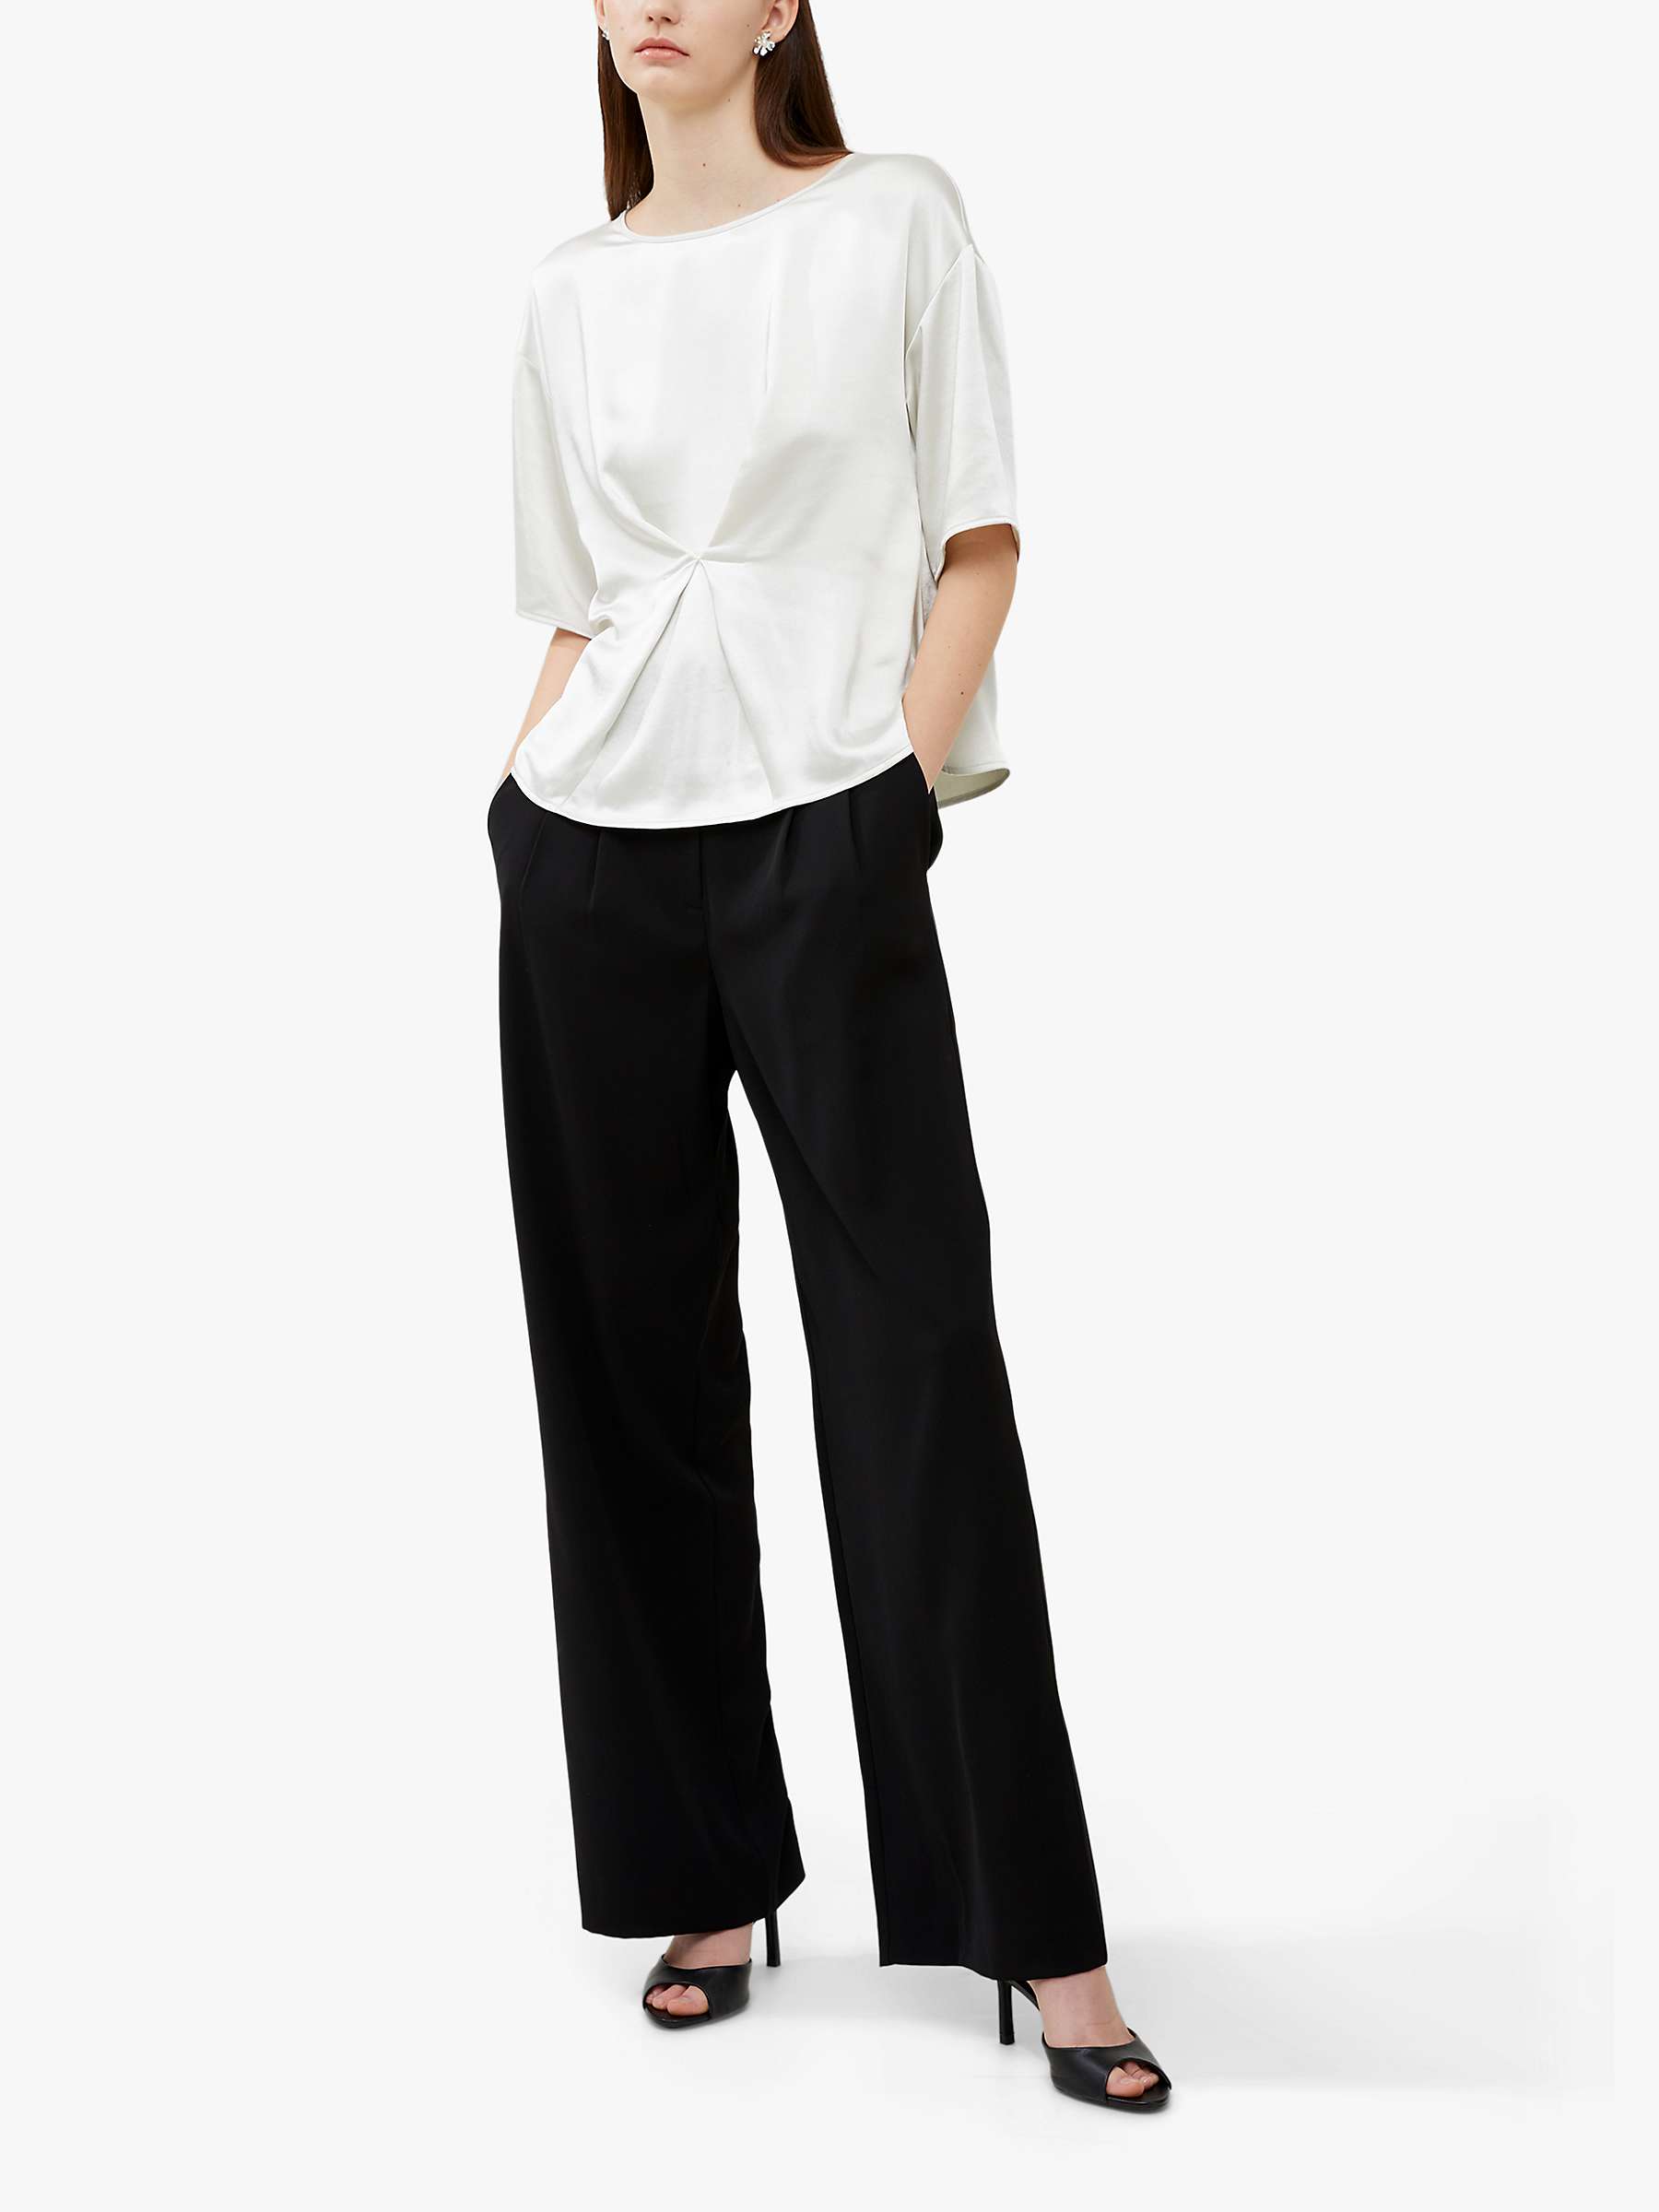 Buy French Connection Chloetta Satin Blouse, Silver Lining Online at johnlewis.com